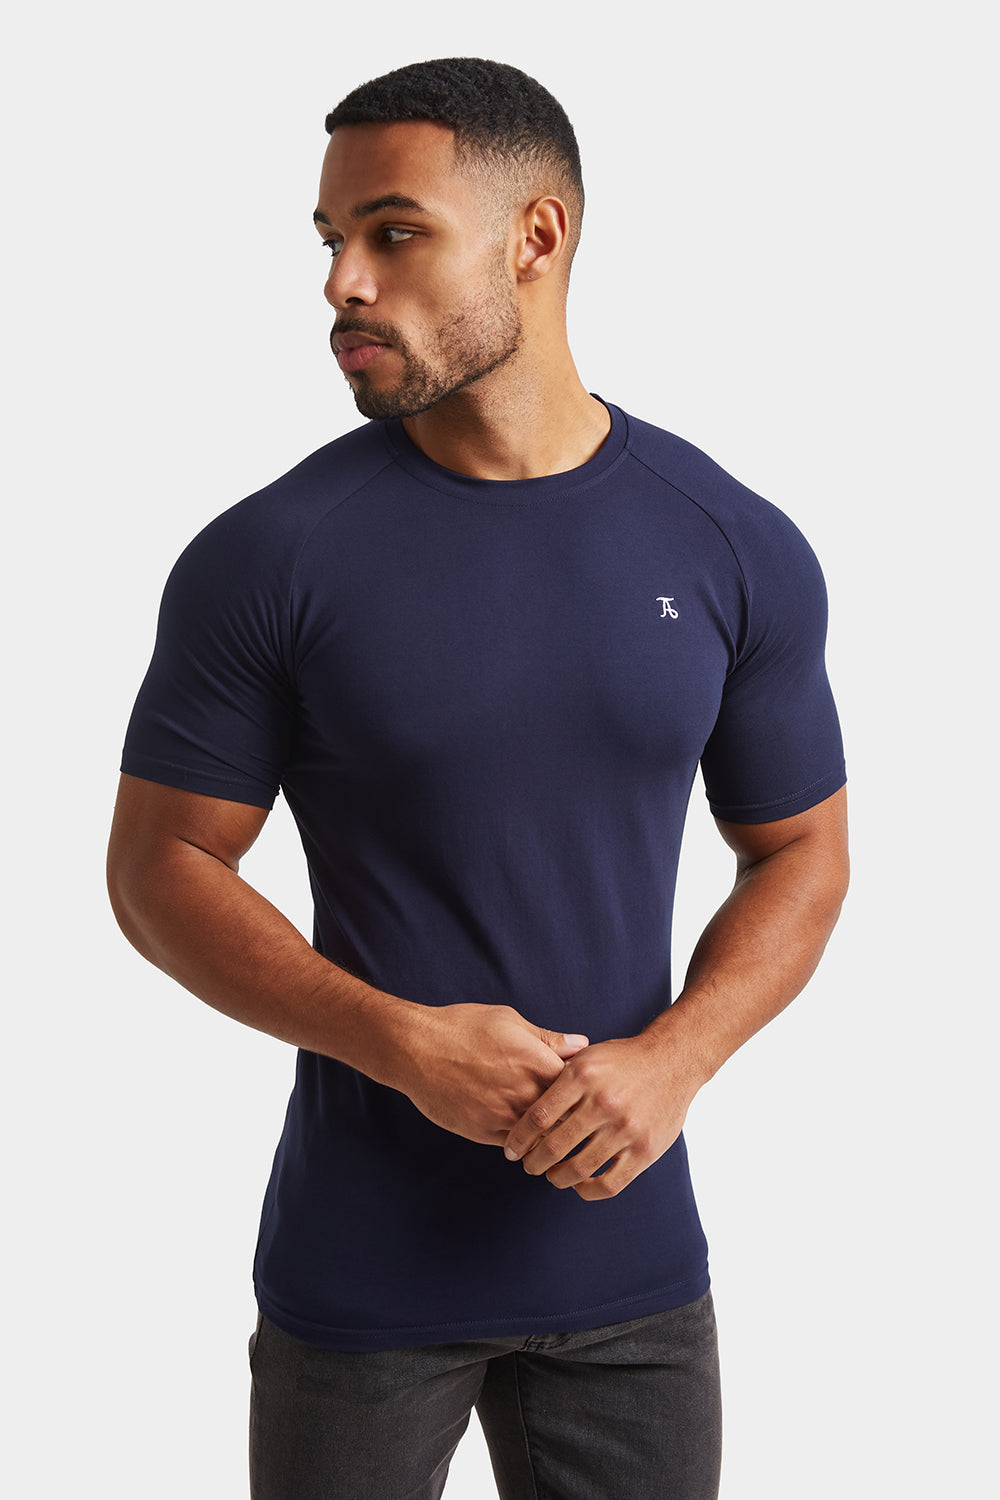 Premium Muscle Fit T-Shirt in True Navy - TAILORED ATHLETE - ROW